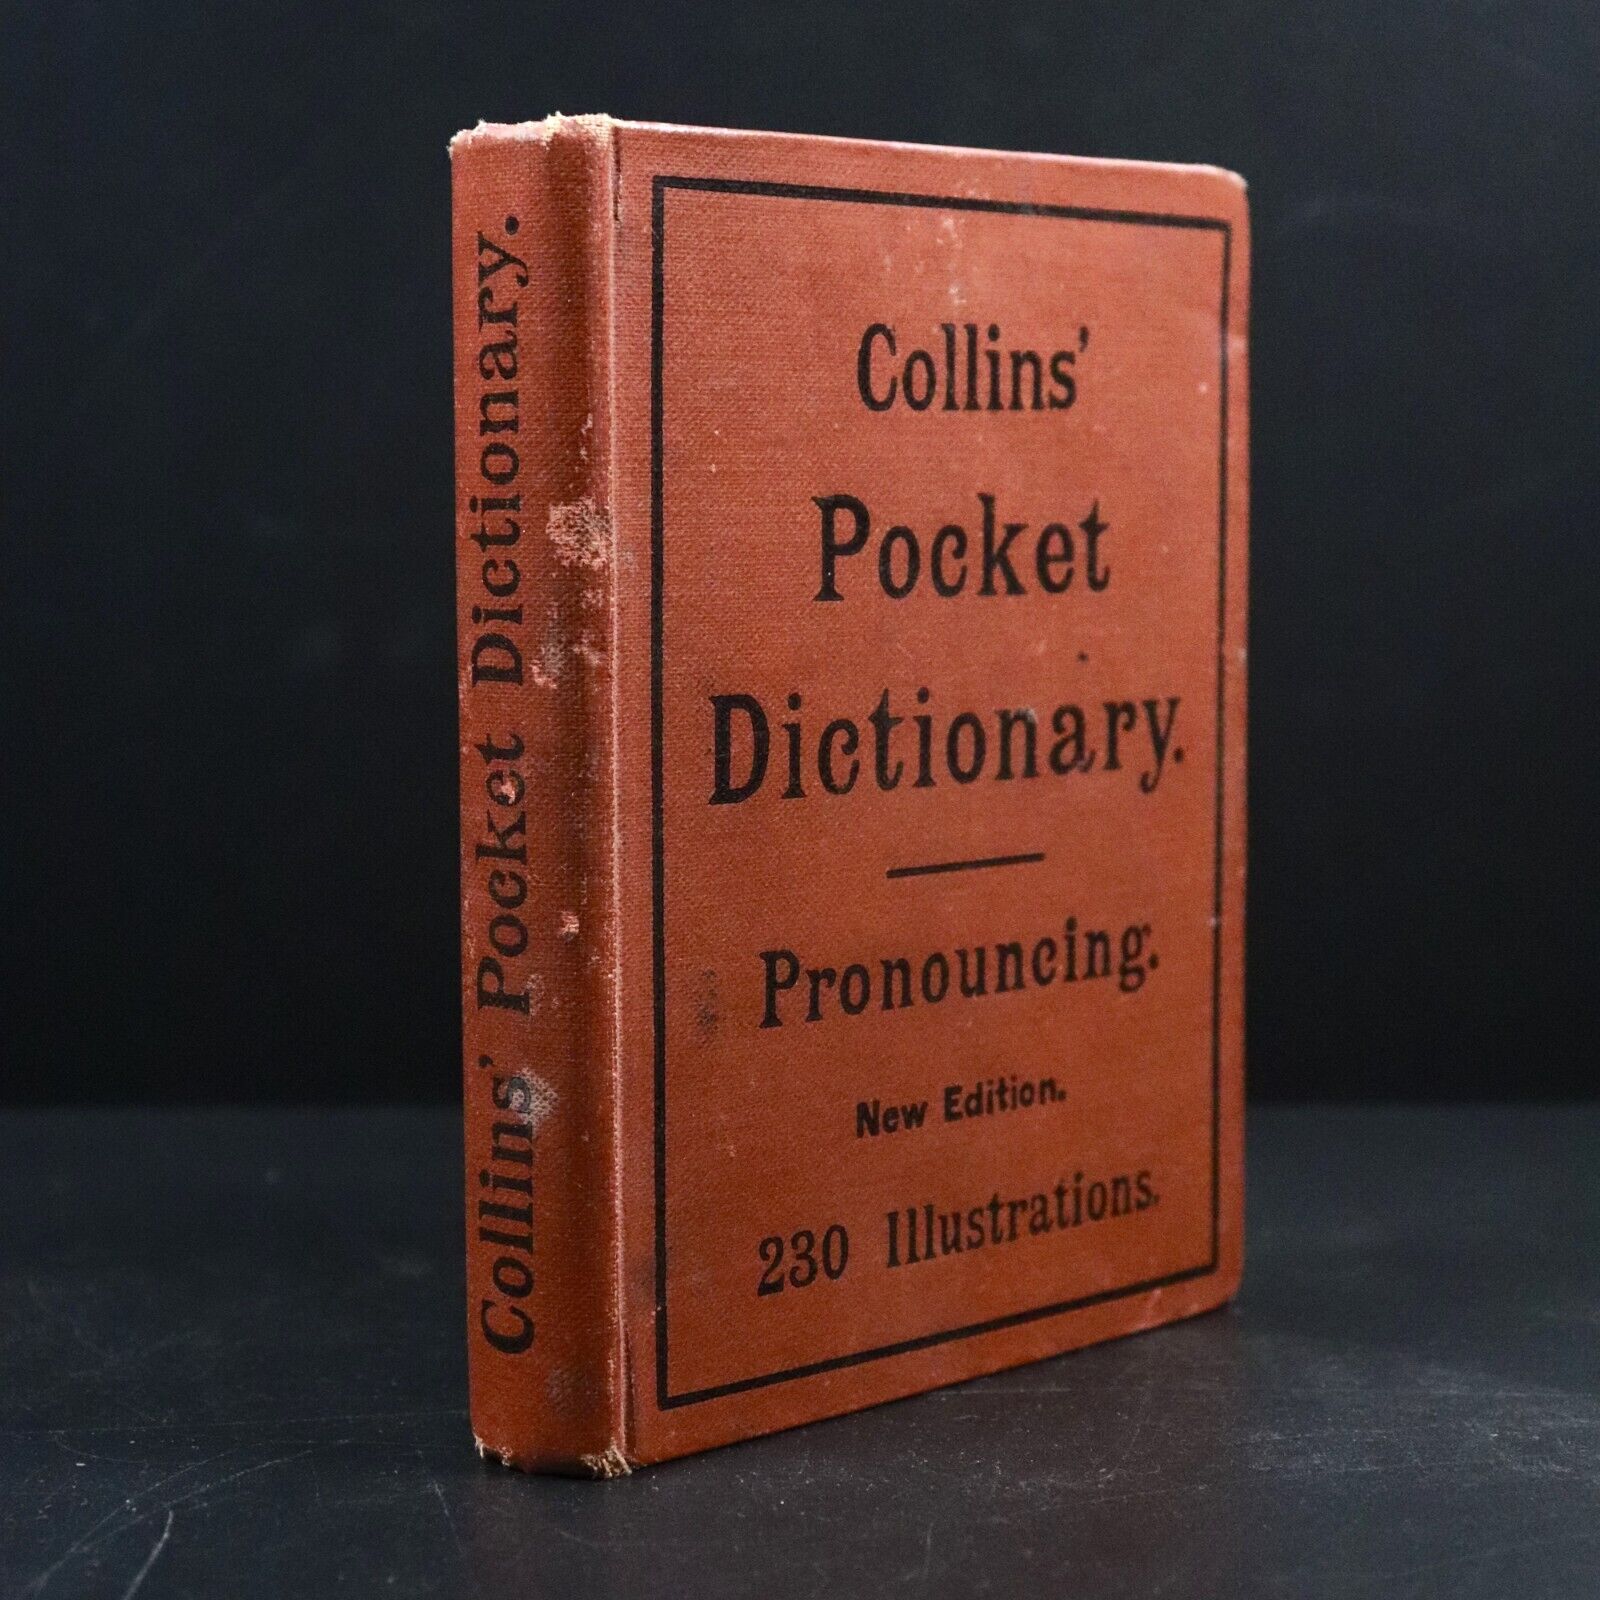 c1900 Collins' Pocket Dictionary Pronouncing Illustrated Antique Reference Book